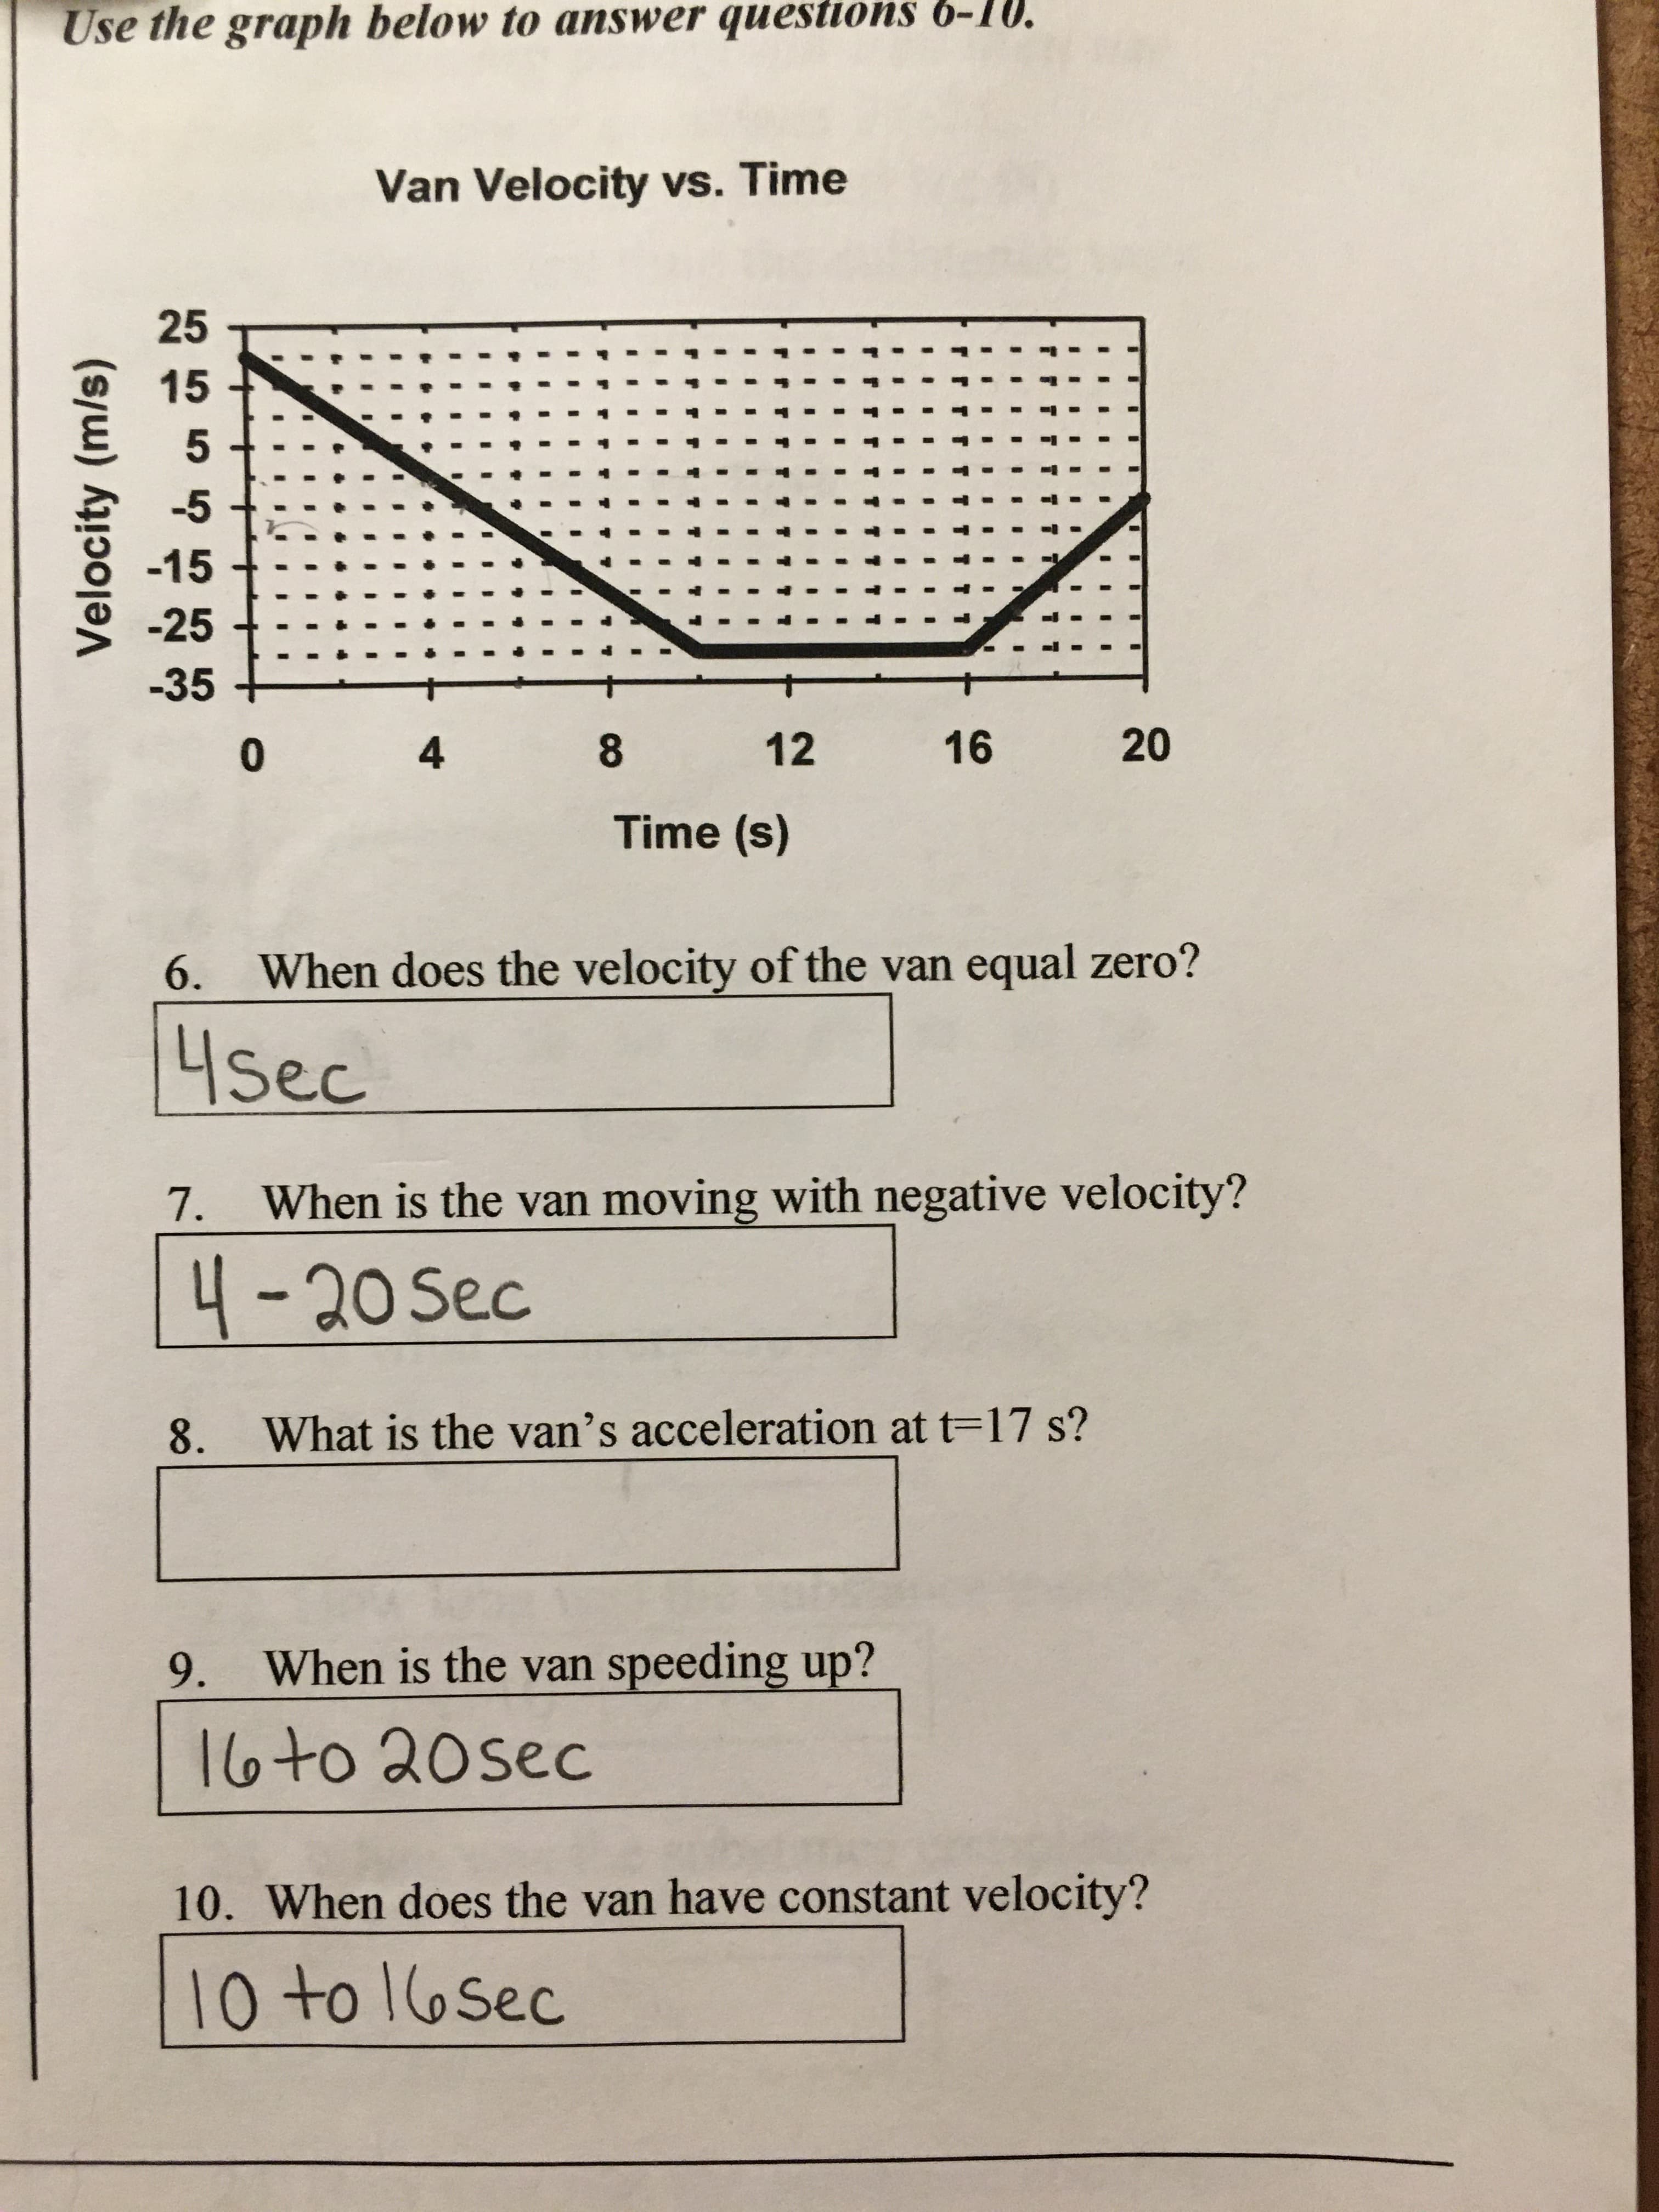 Use the graph below to answer questions 6-10.
Van Velocity vs. Time
25
15
-5
-15
-25
-35
0
4
12
16
Time (s)
6. When does the velocity of the van equal zero?
4sec
7.
When is the van moving with negative velocity?
4-20 Sec
What is the van’s acceleration at t=17 s?
9. When is the van speeding up?
16to 20sec
10. When does the van have constant velocity?
10
to l6sec
20
8.
Velocity (m/s)
